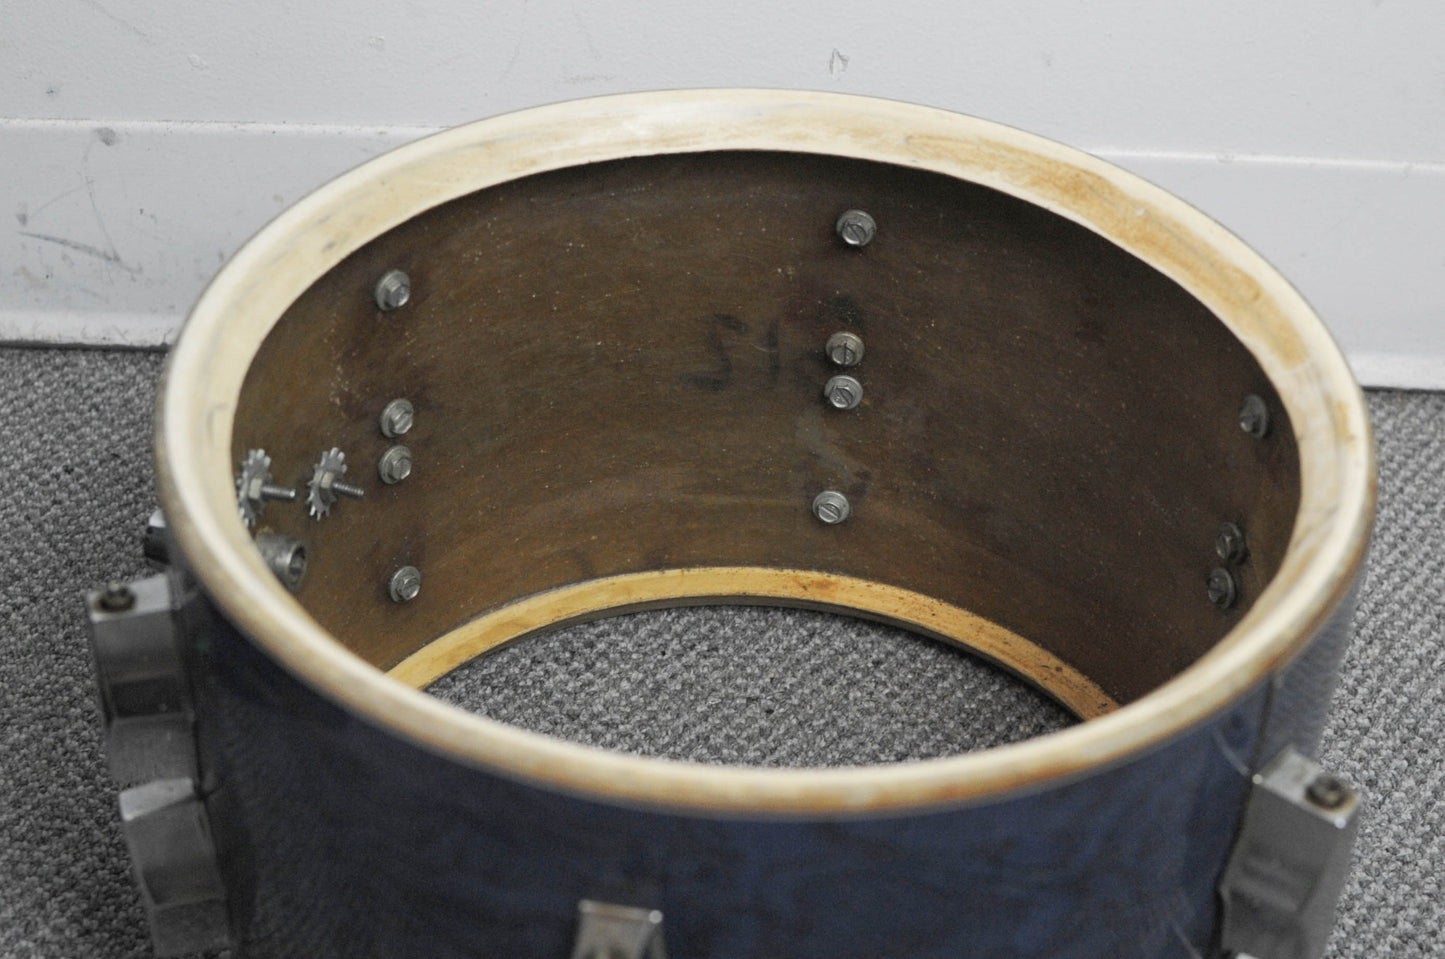 1970s Fibes "Blue Marble" Double Bass Drum Kit